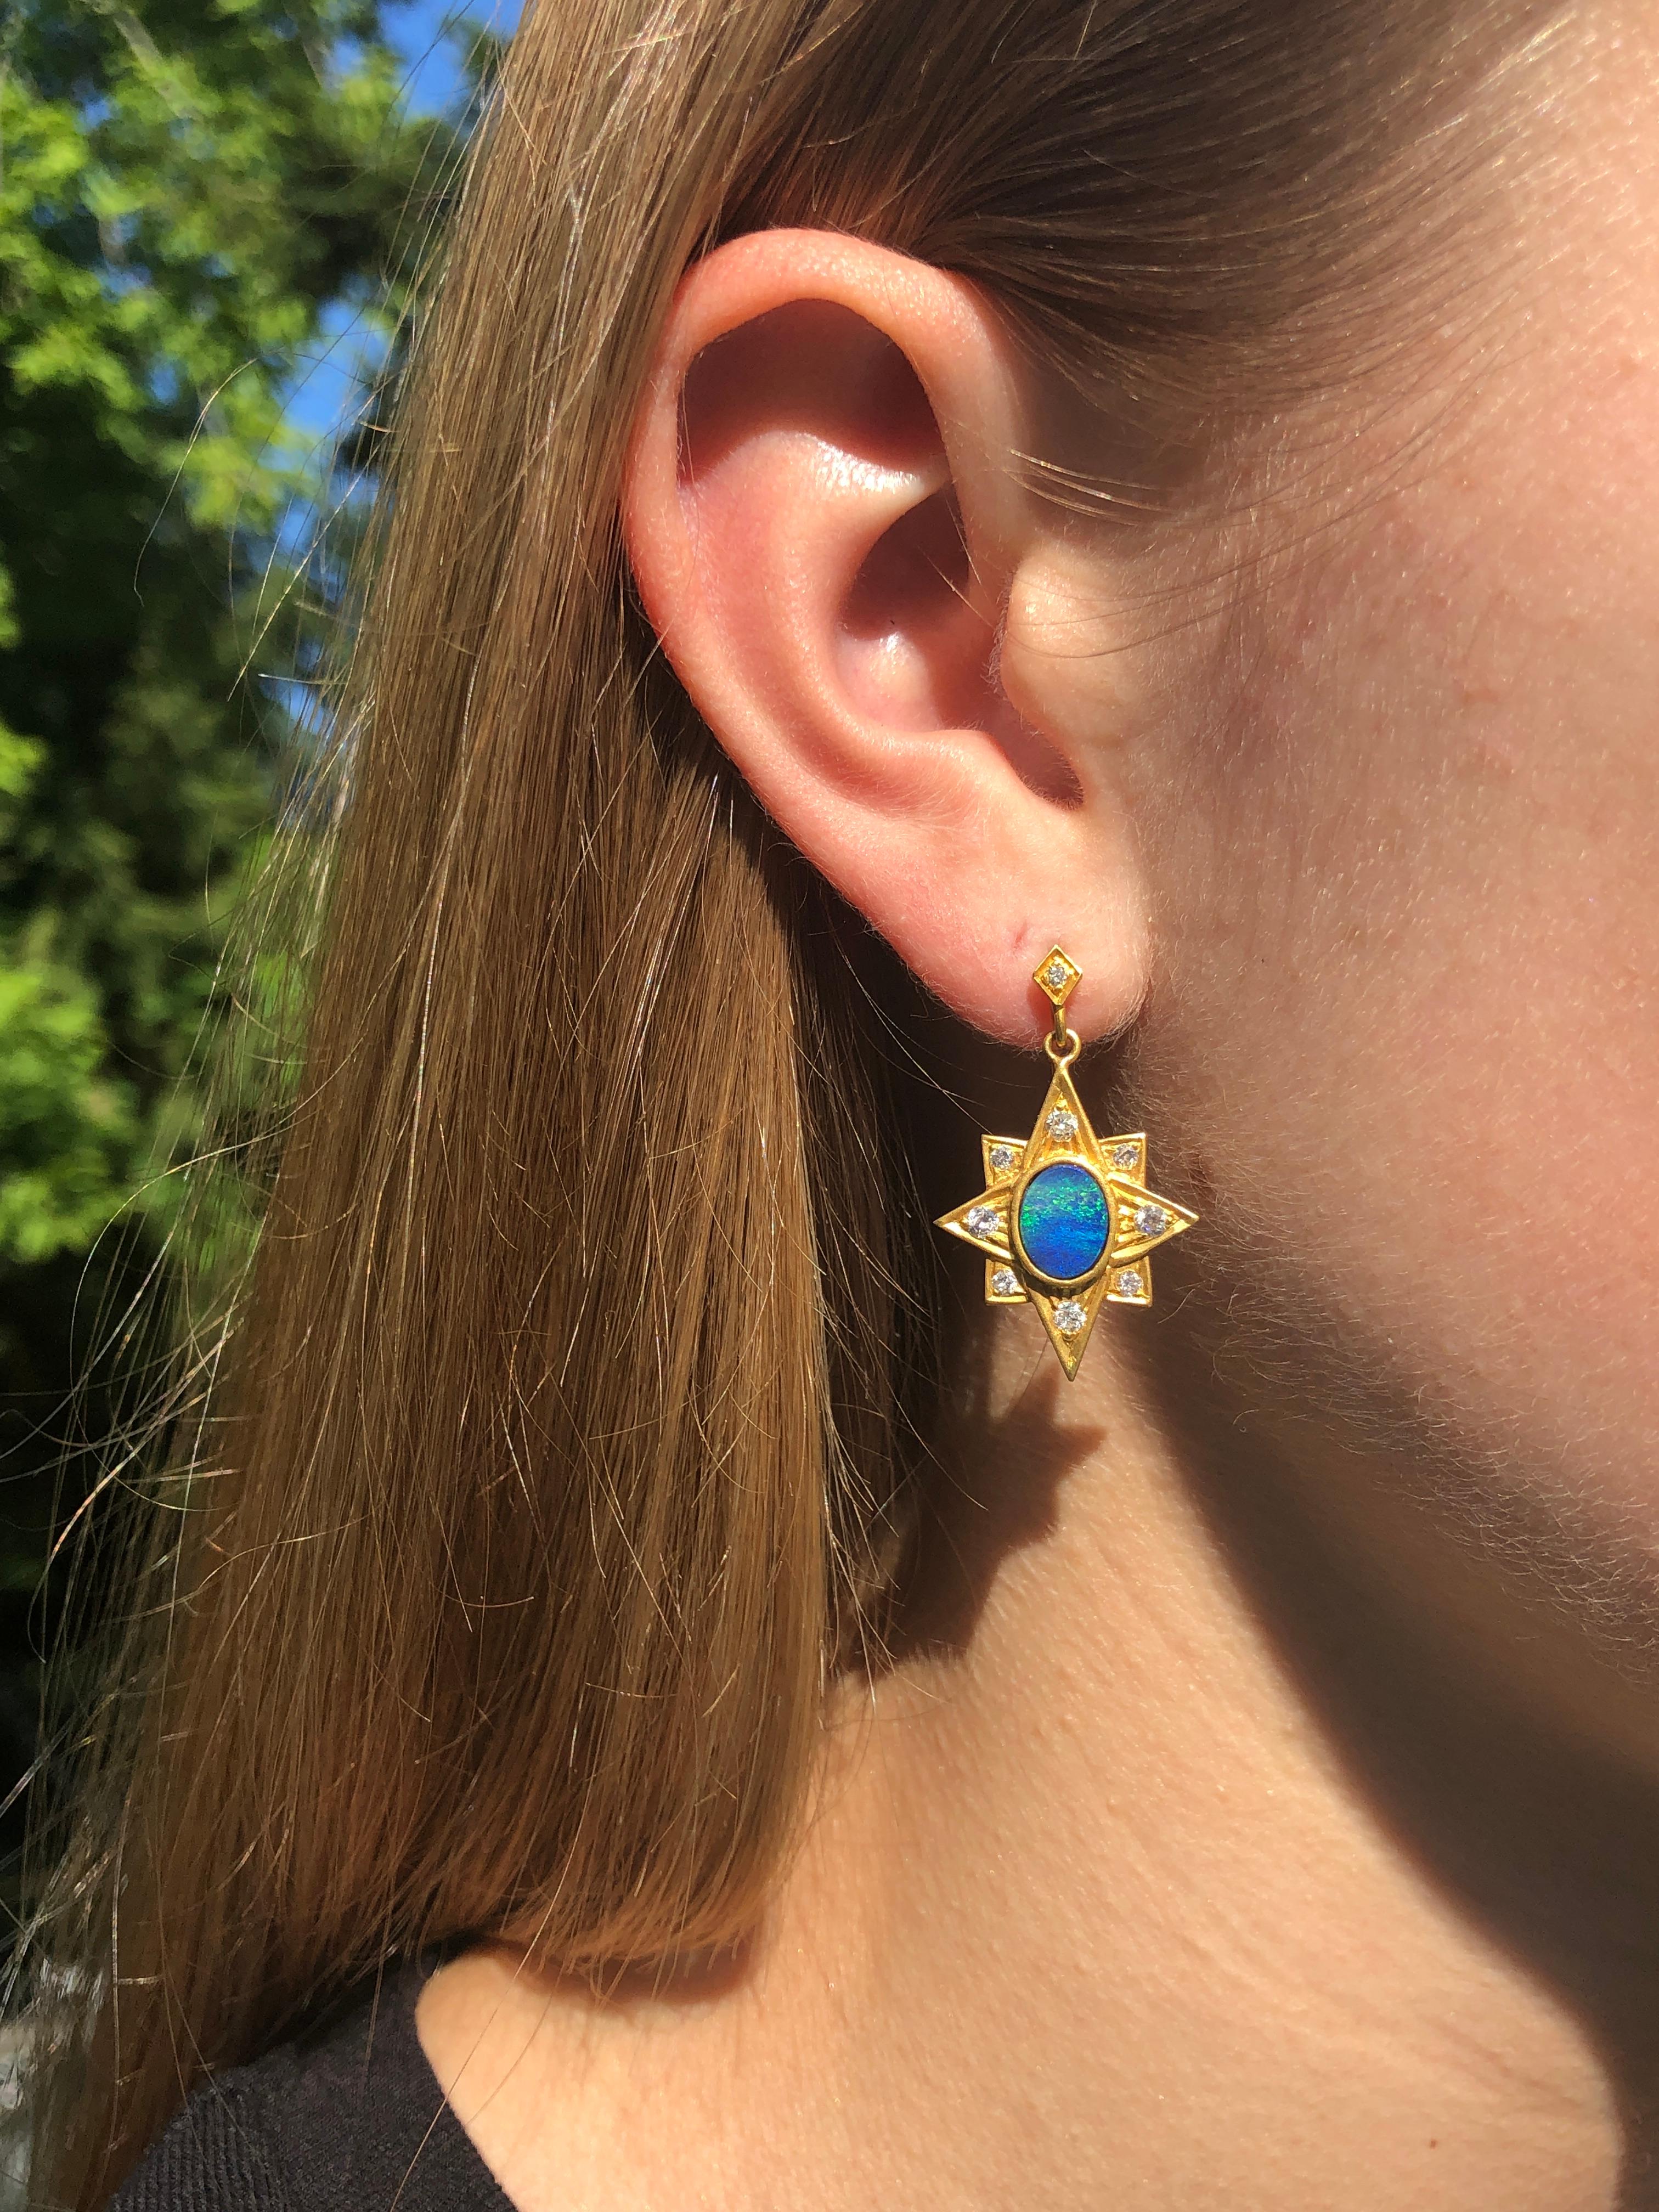 These brilliant blue Boulder Opals are surrounded by .53cts Diamonds and set in a 18kt Gold star formation.  Lightweight and easy to wear all the time, these earrings are the perfect way to finish an outfit, day or evening appropriate.  Available in